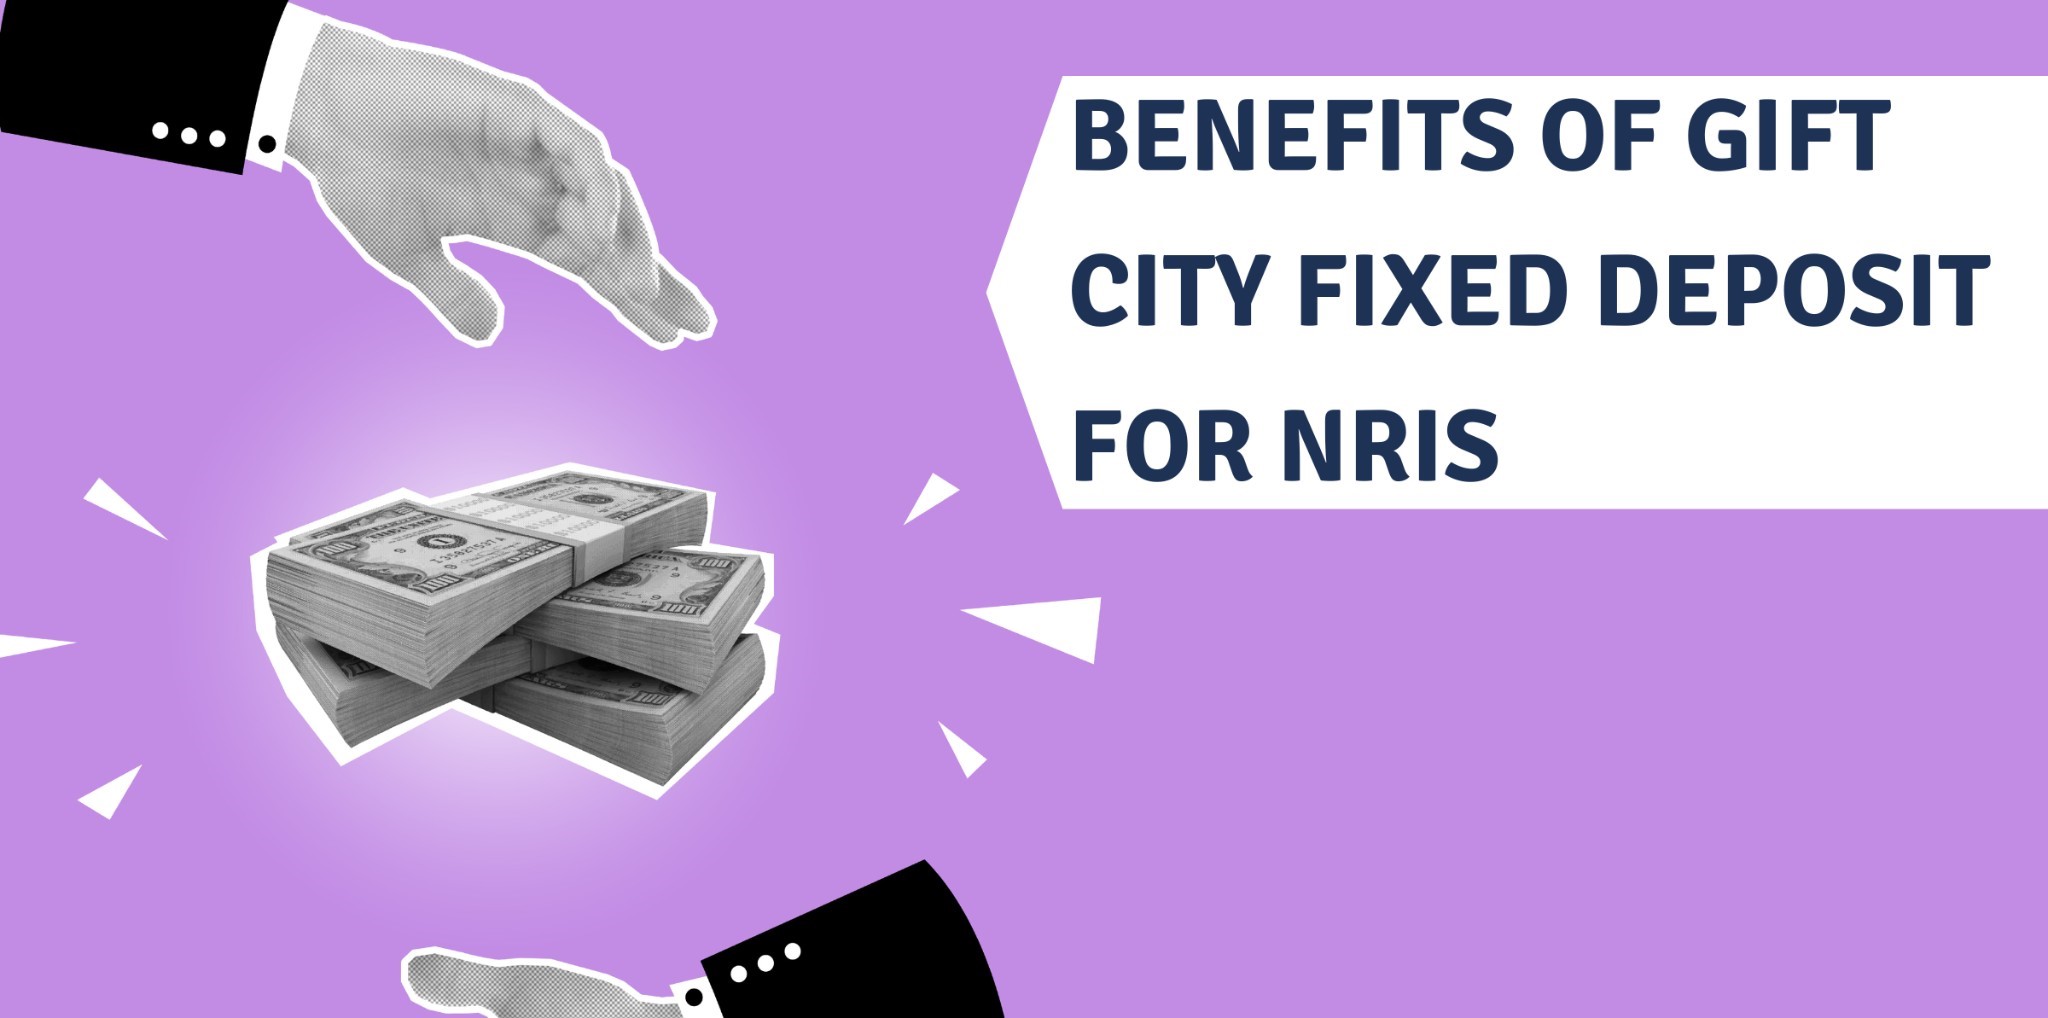 Benefits of Fixed Deposits in GIFT City for NRIs